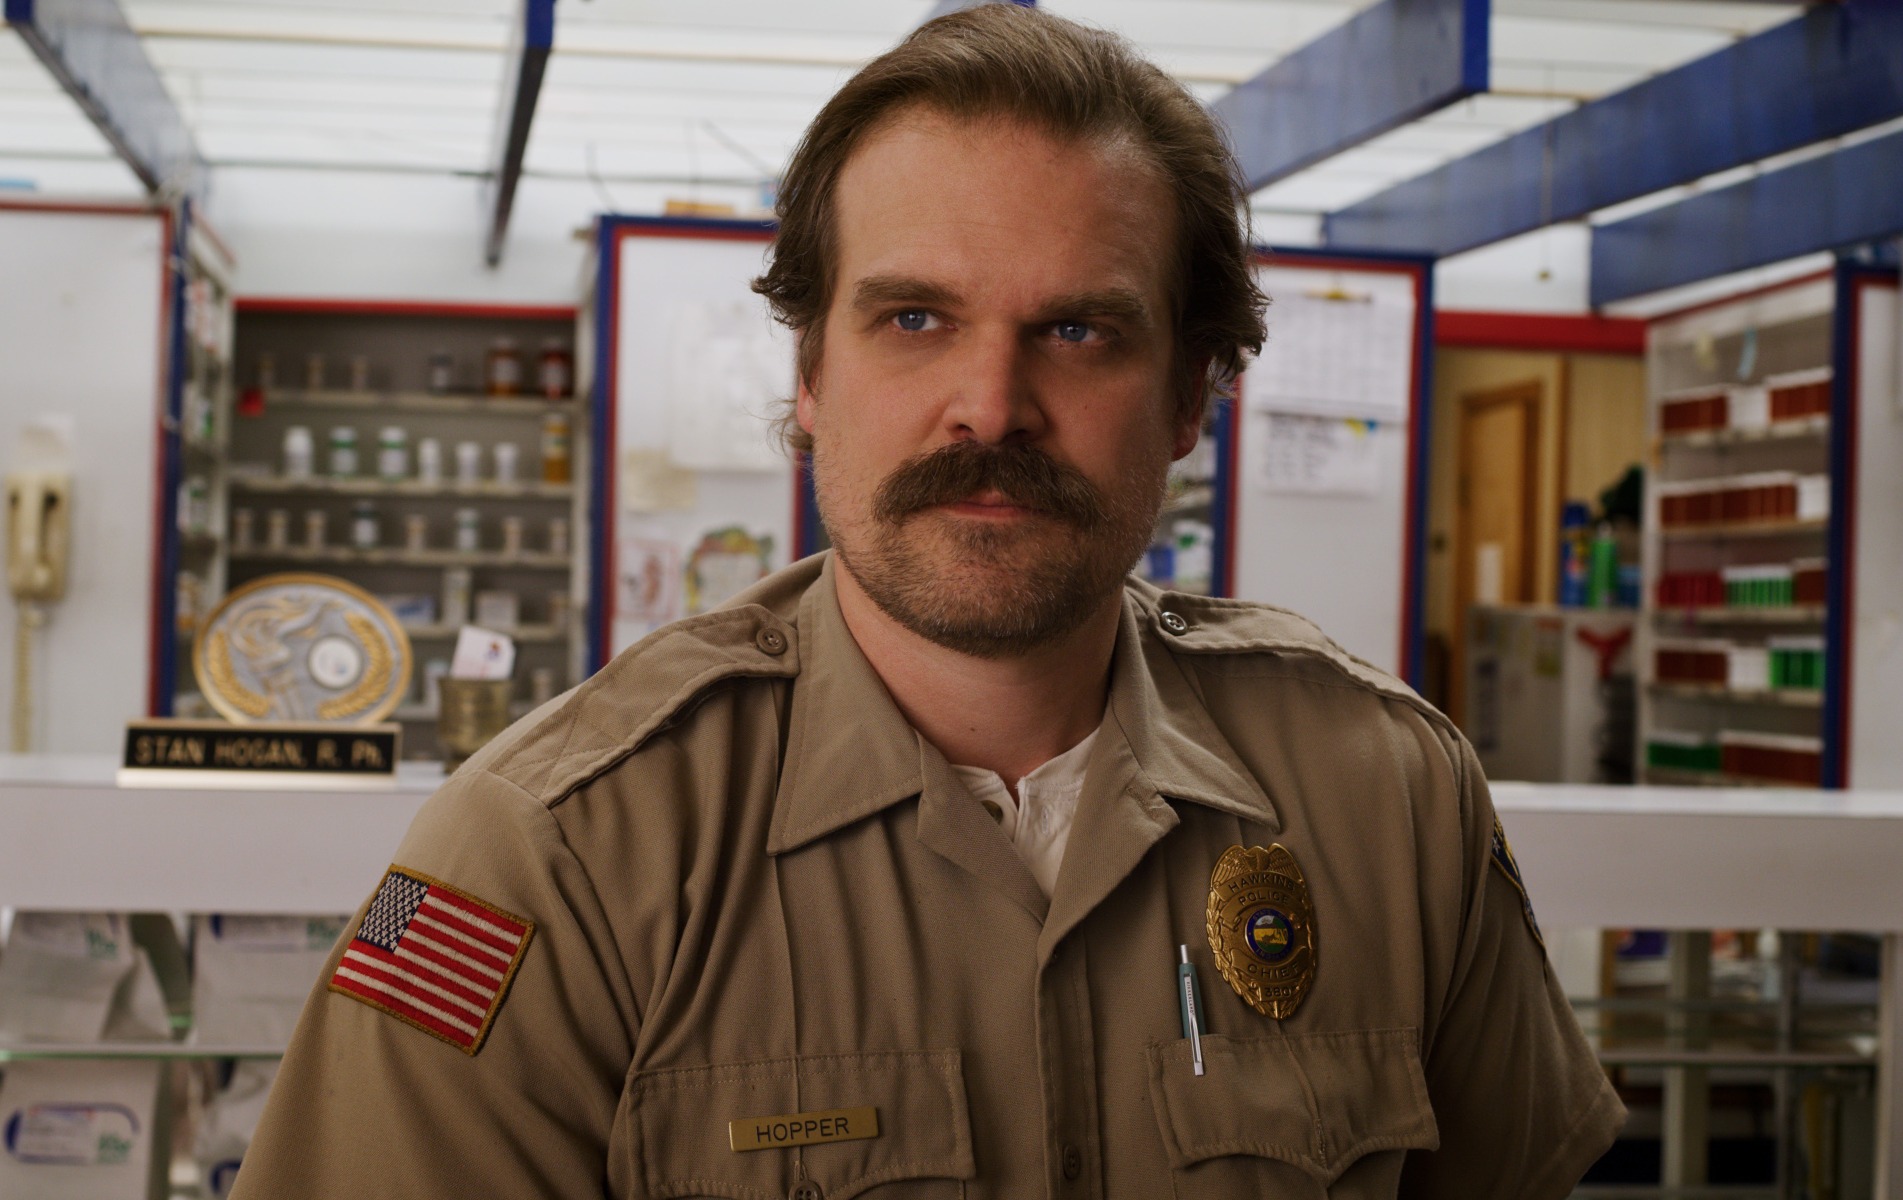 'Stranger Things' star David Harbour as Jim Hopper, whose ending is reportedly 'quite moving.' He's wearing his police uniform here and standing in a store.